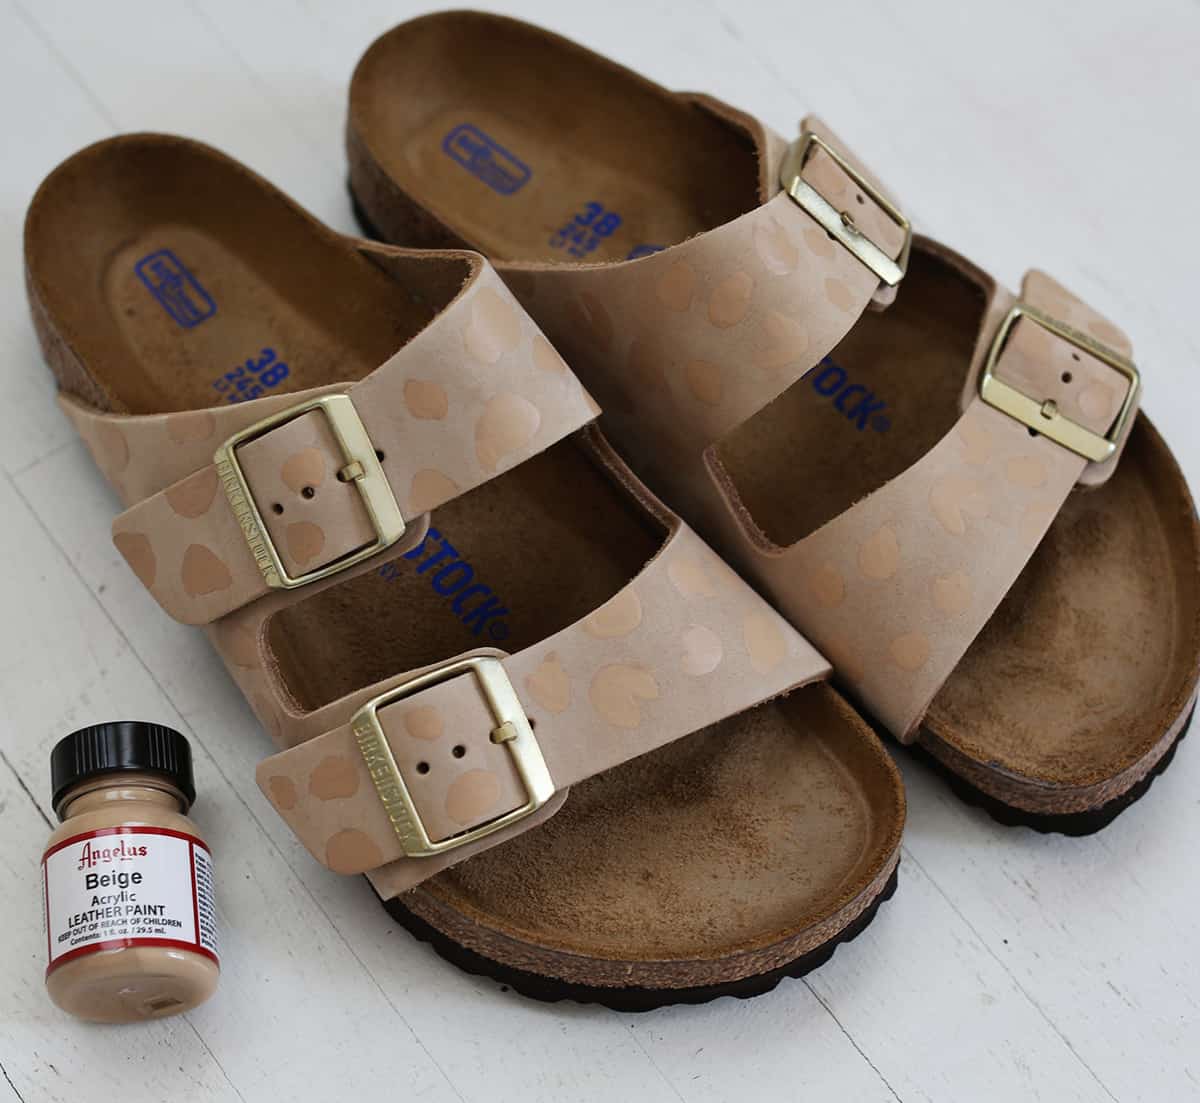 Leather acrylic paint bottle next to the slippers